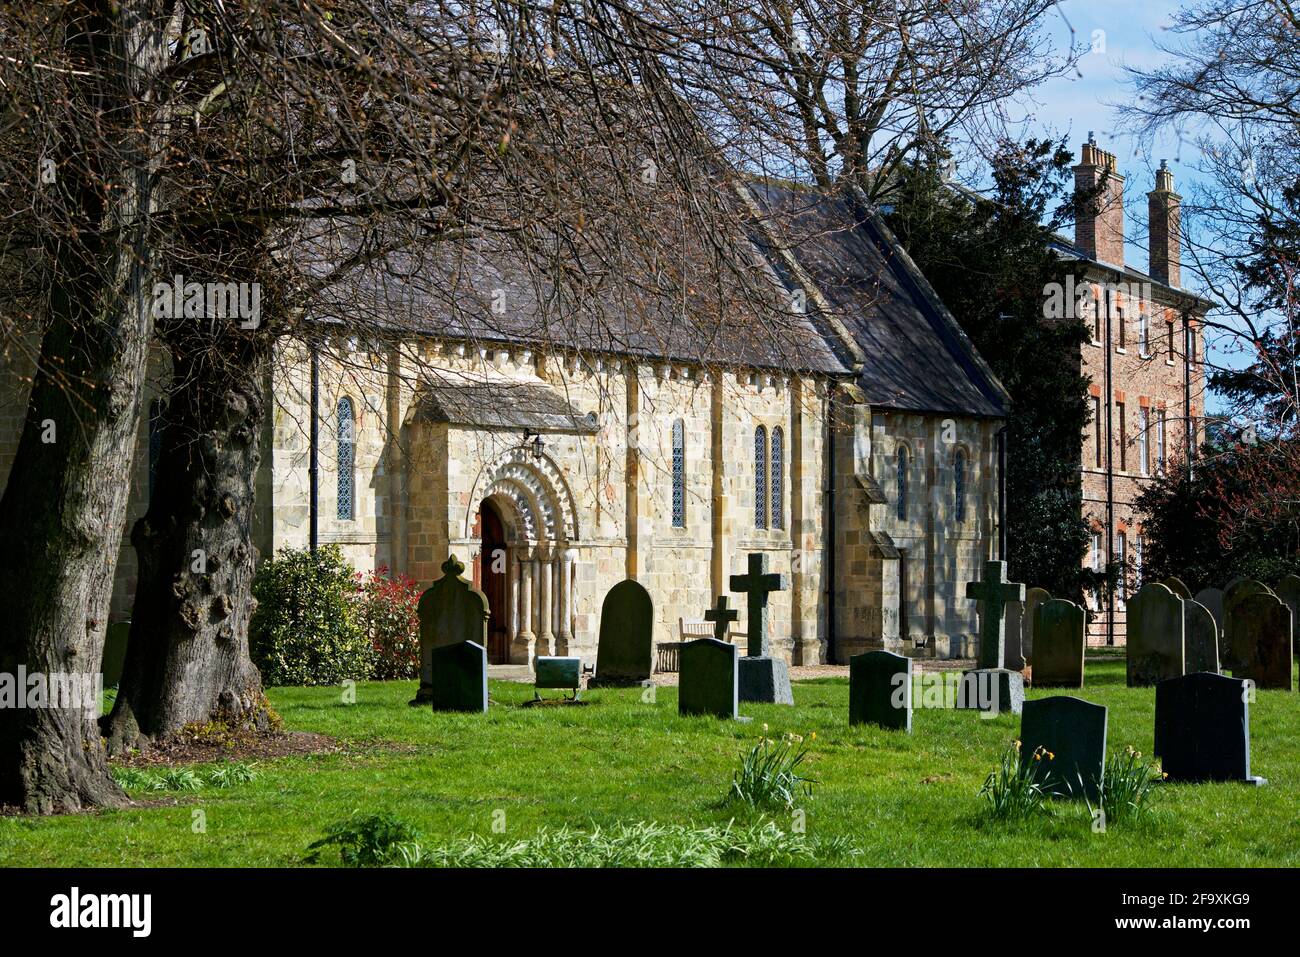 St Martin's Church in the village of Fangfoss, East Yorkshire, England UK Stock Photo